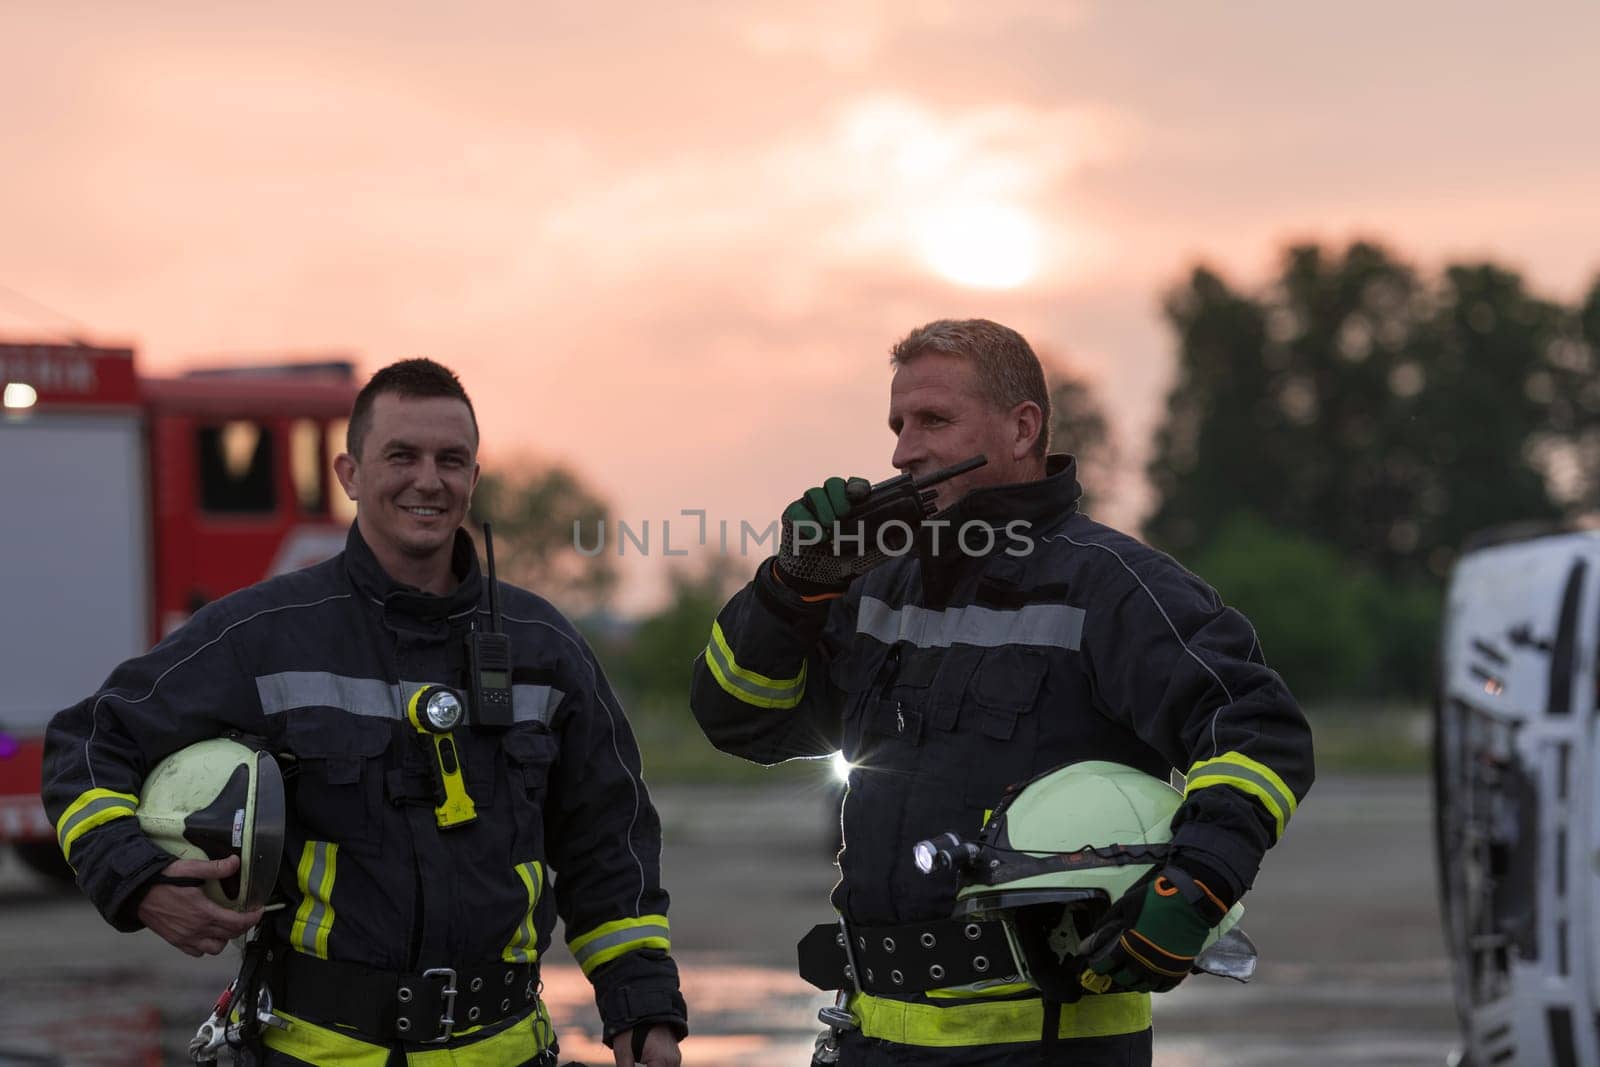 fireman using walkie talkie at rescue action fire truck and fireman's team in background. High quality photo